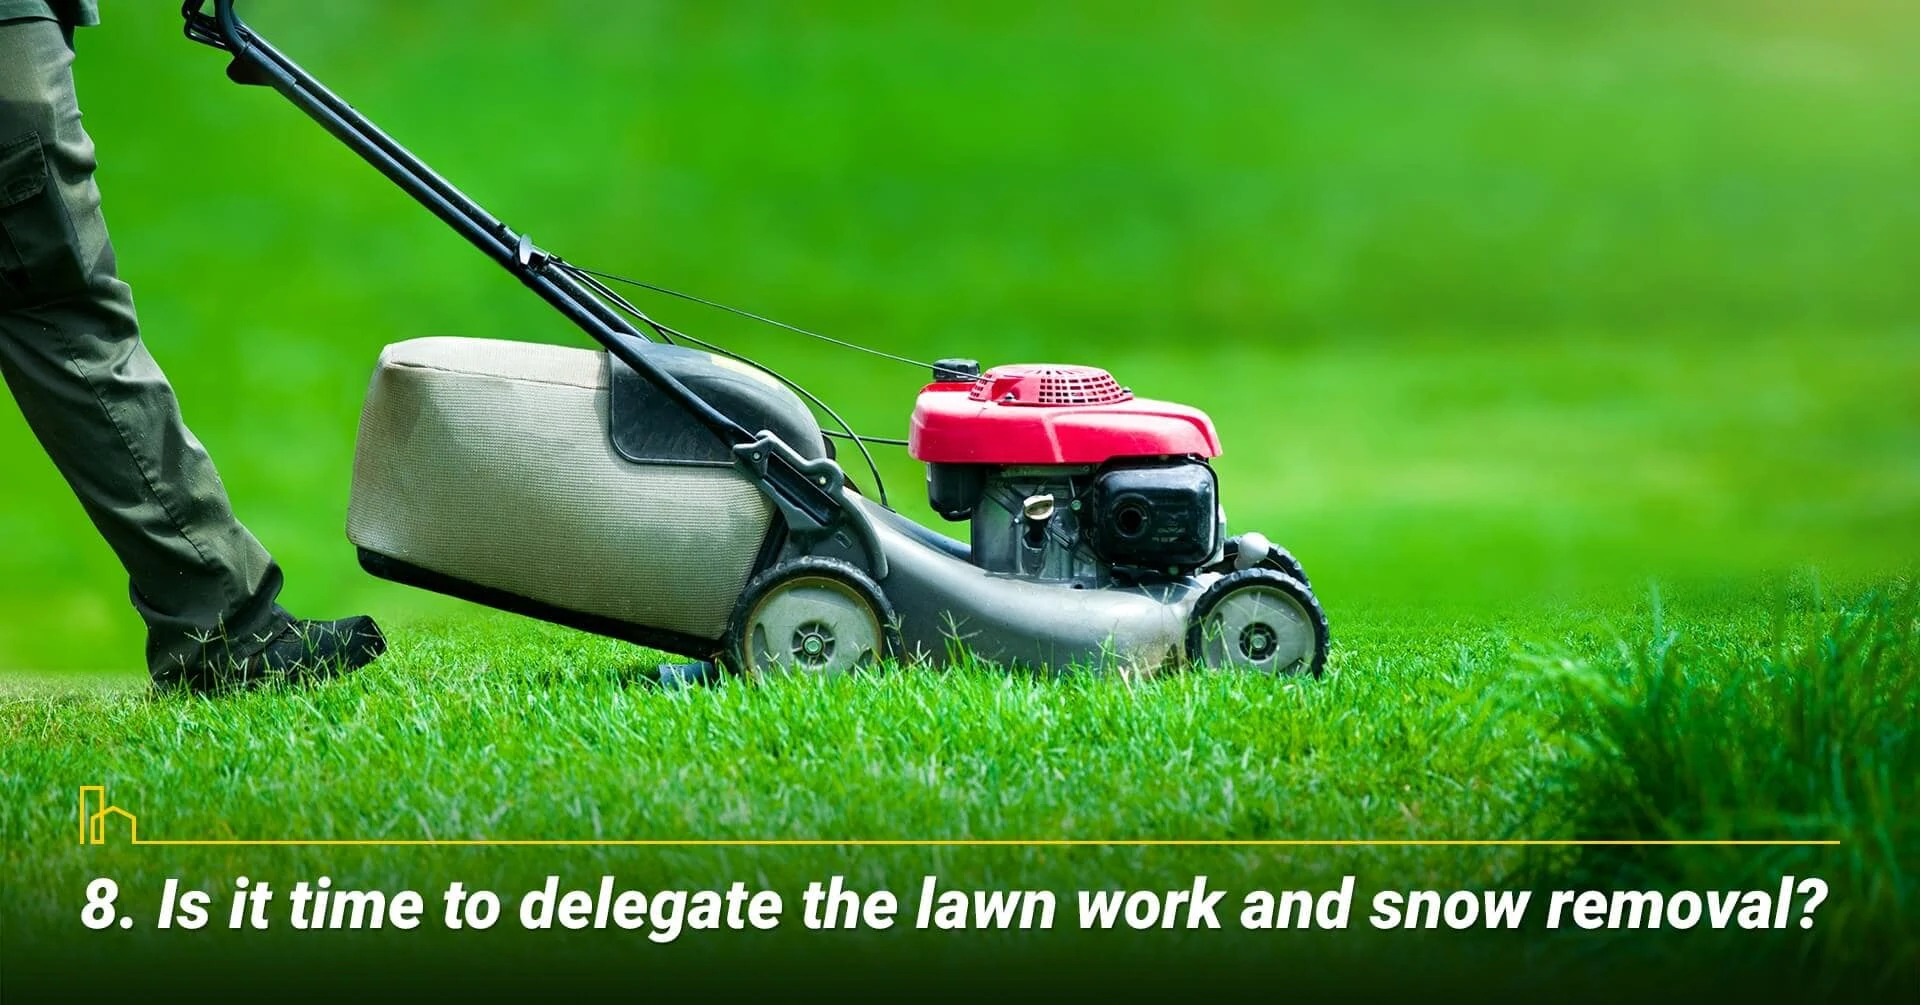 Is it time to delegate the lawn work and snow removal? no more lawn work and snow removal